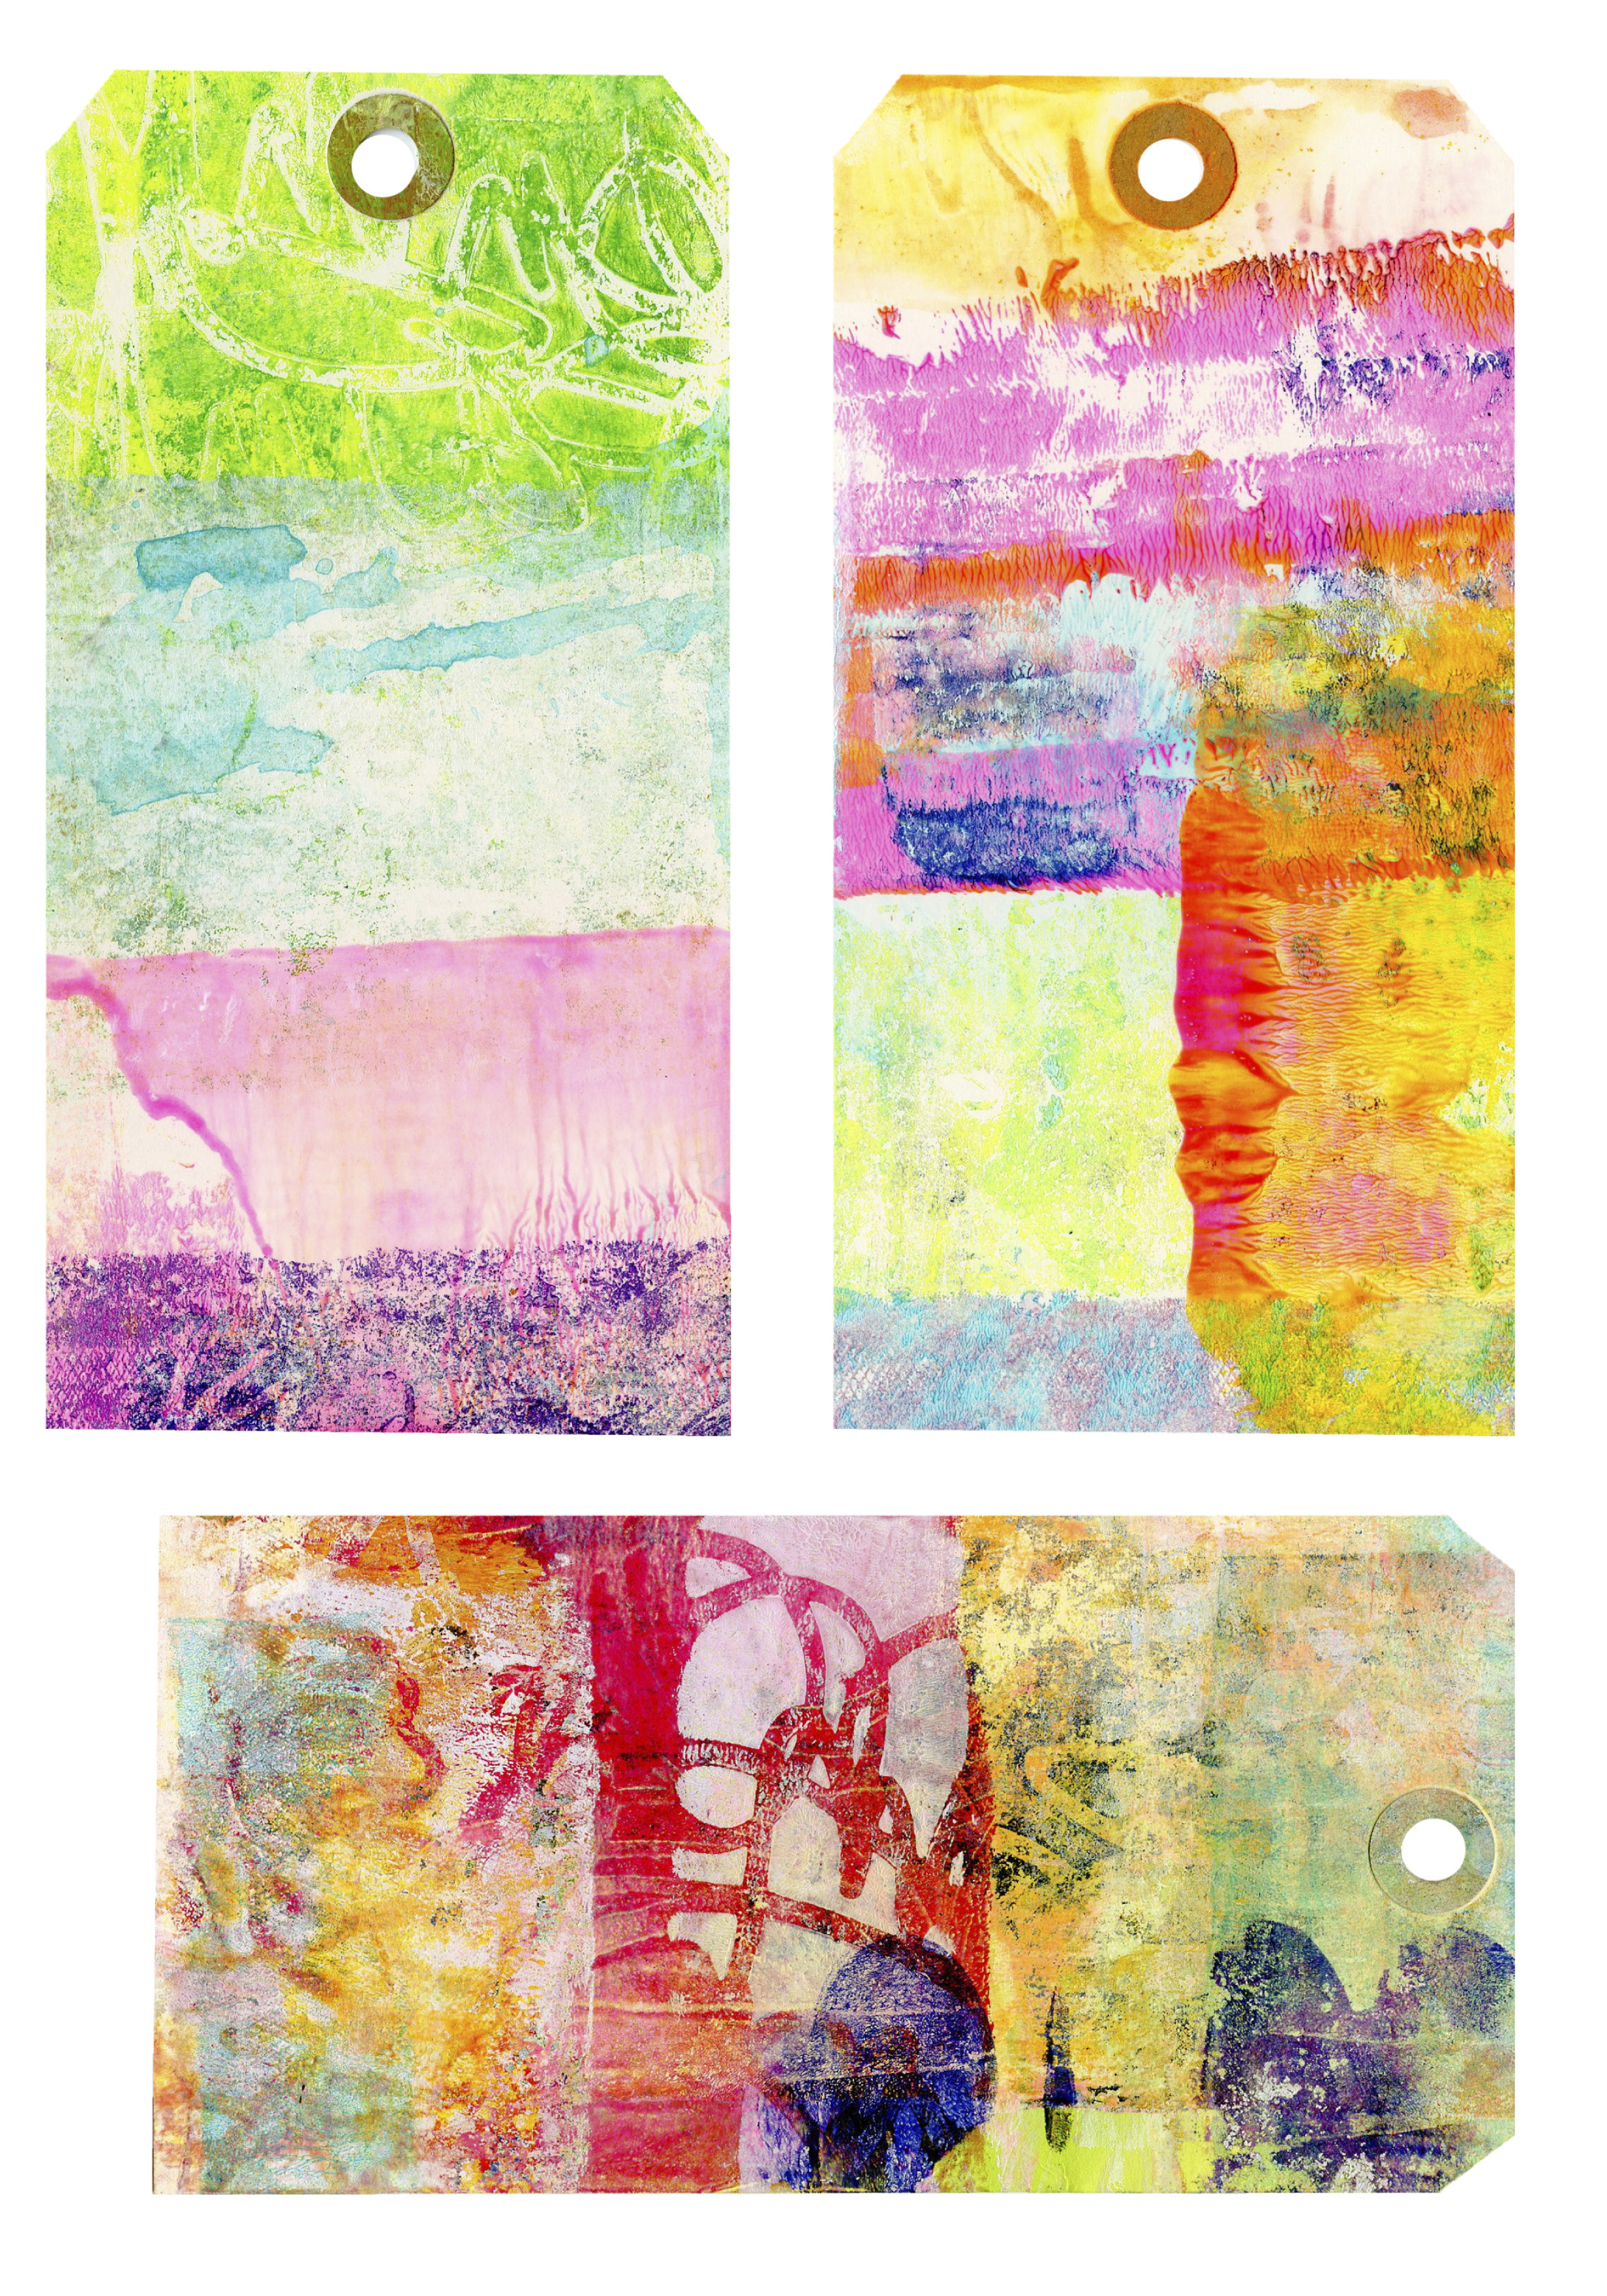 How to  and review of Gelli Arts